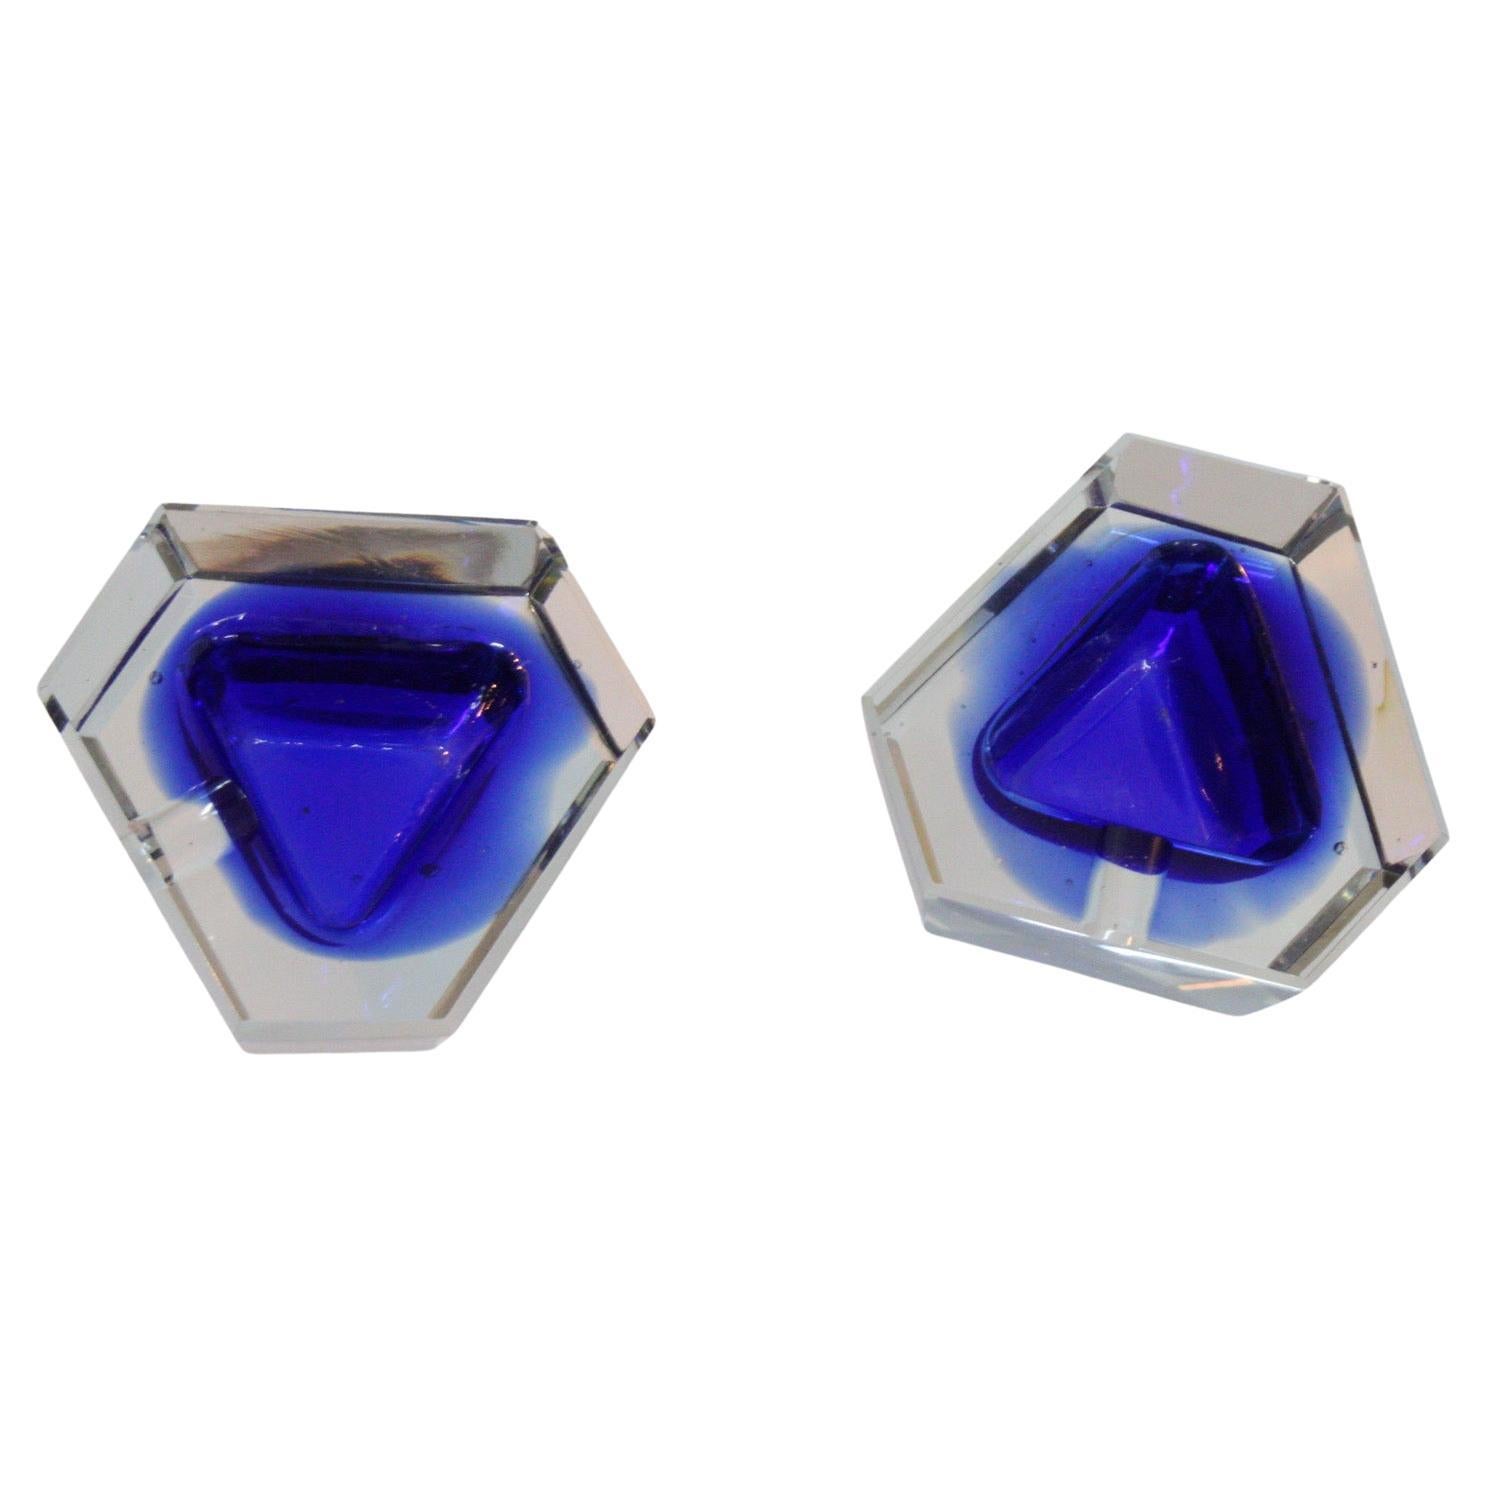 Add a little shine into your home with this blue pair of asstrays.